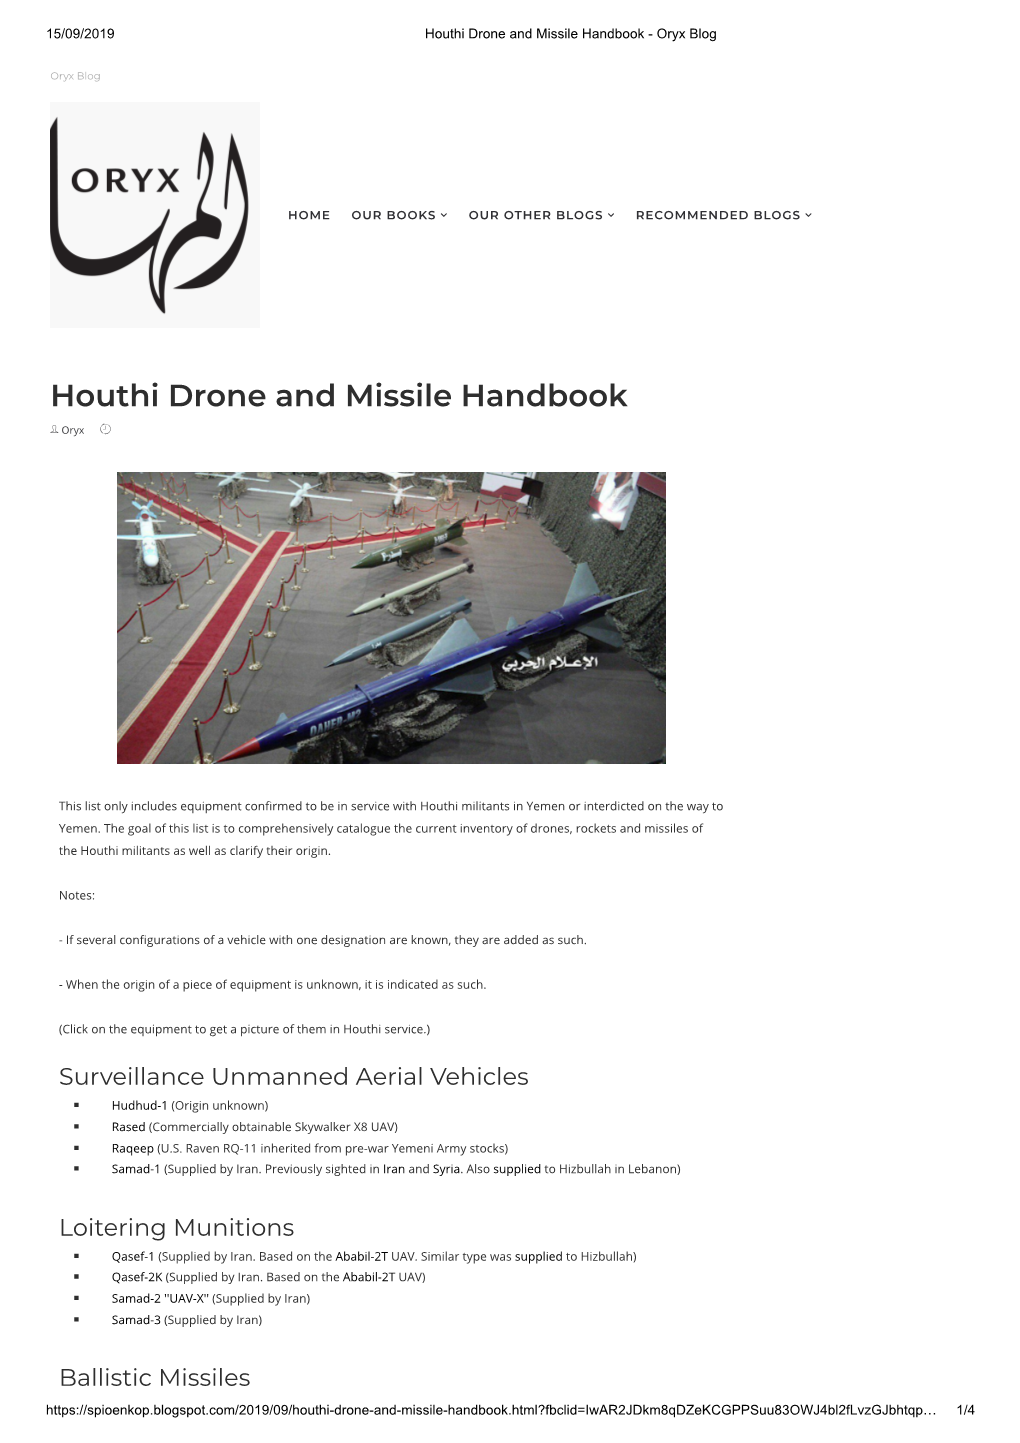 Houthi Drone and Missile Handbook - Oryx Blog